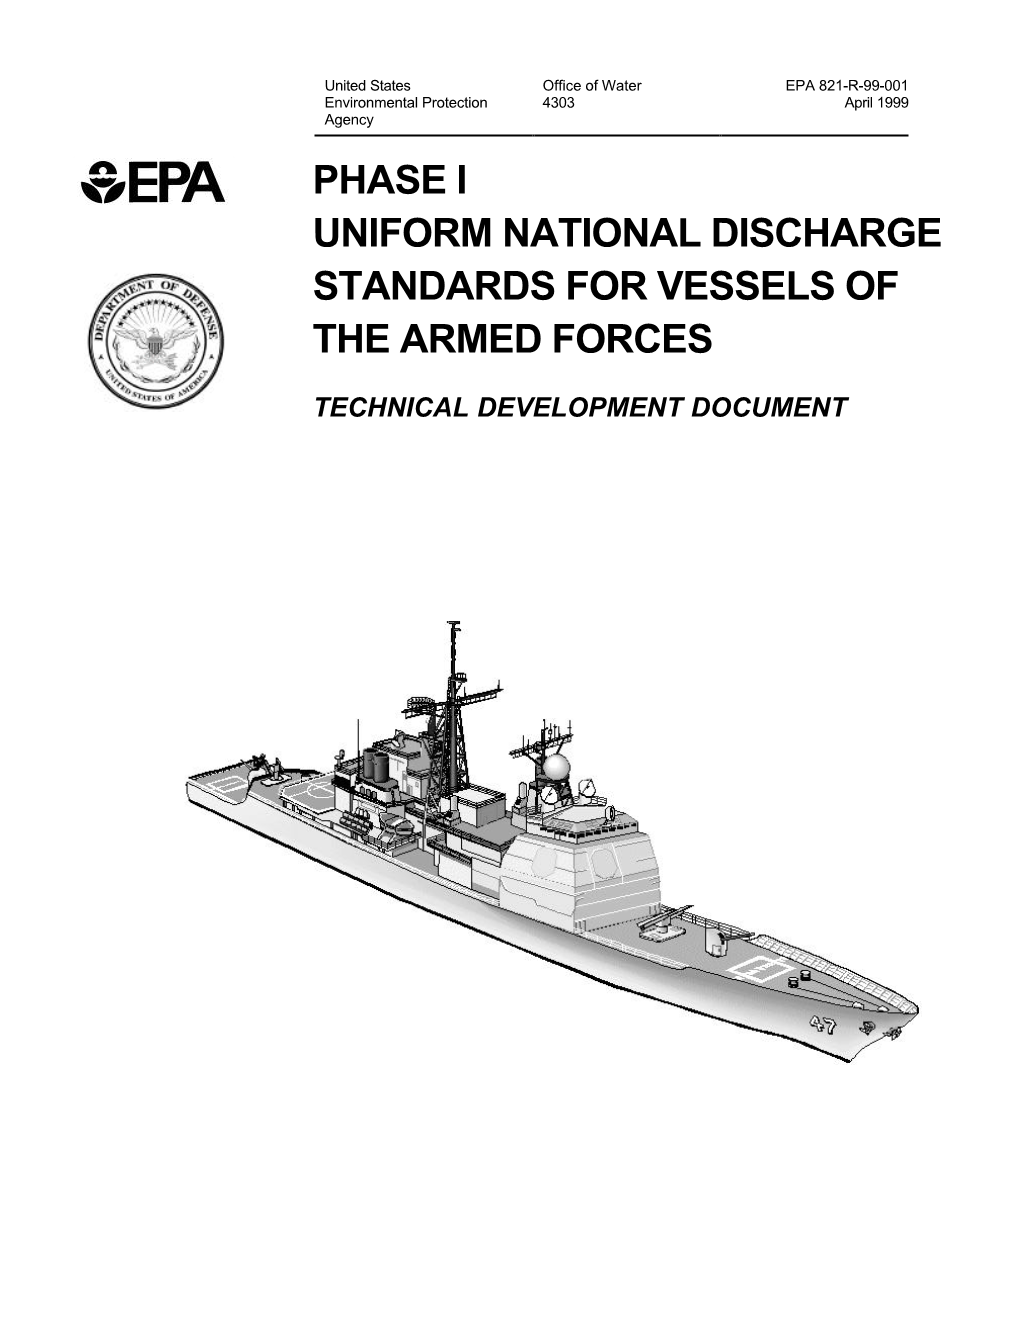 Phase I Uniform National Discharge Standards for Vessels of the Armed Forces